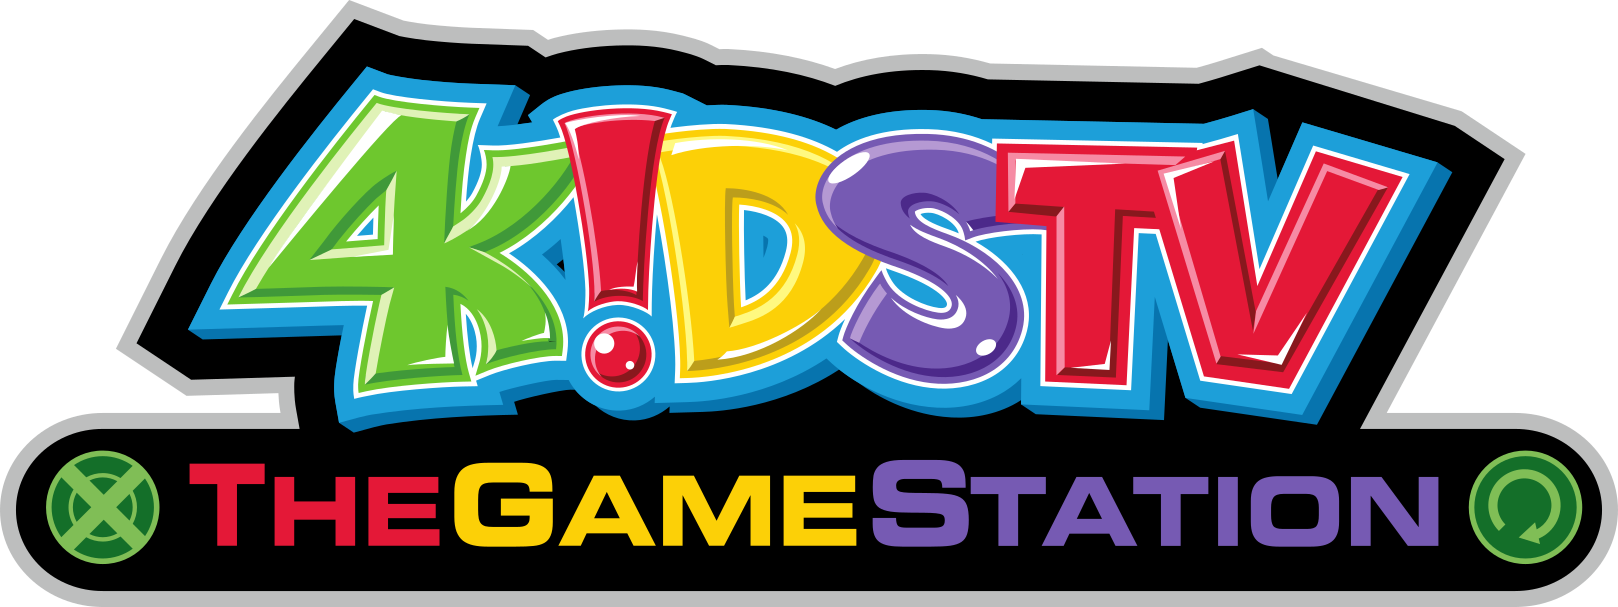 4Kids TV: The Game Station, Idea Wiki